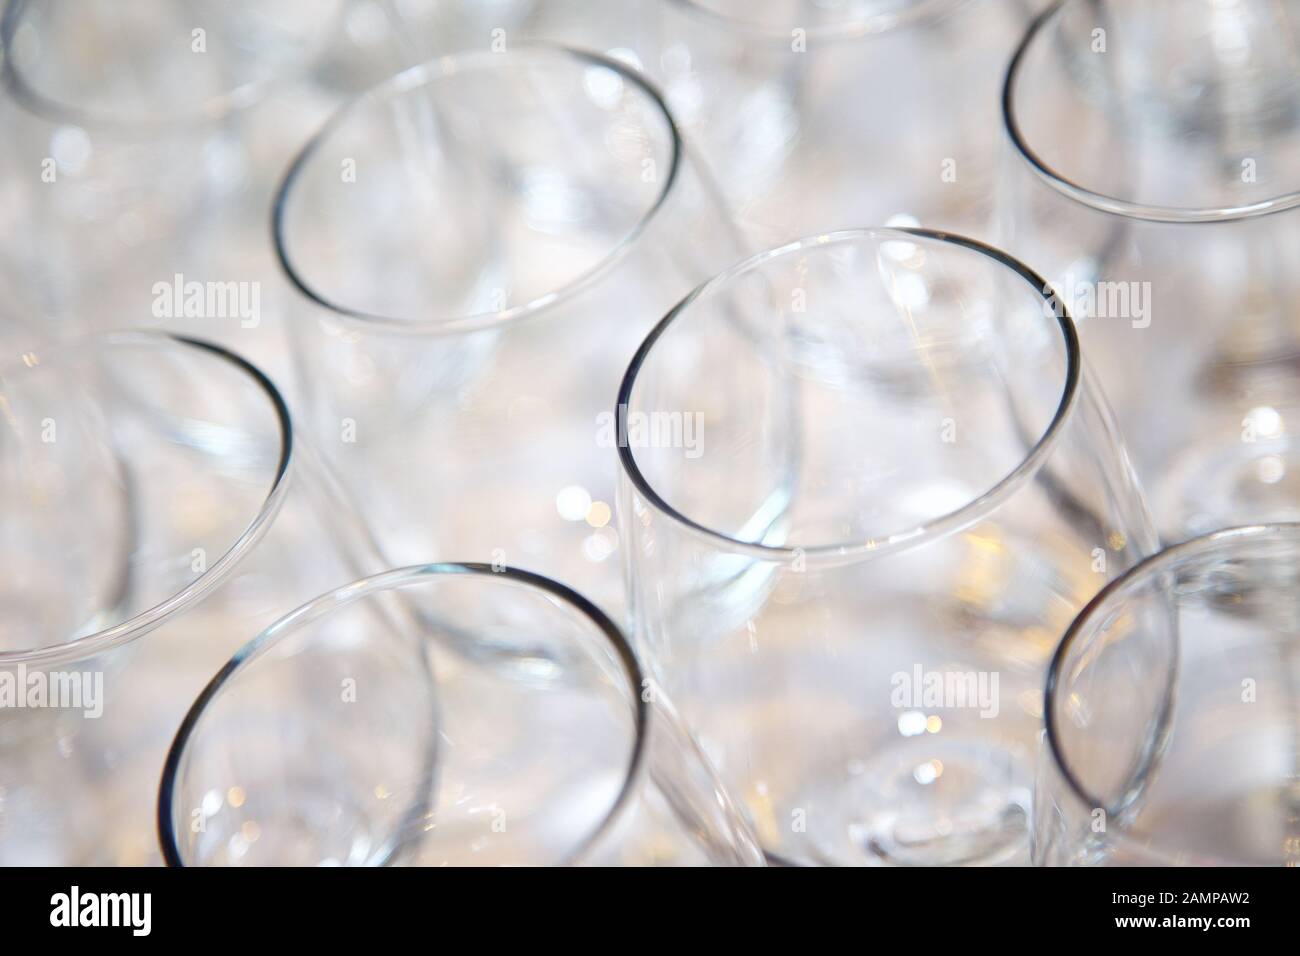 Collection of empty drinking glasses arranged on a bar or restaurant counter. Stock Photo